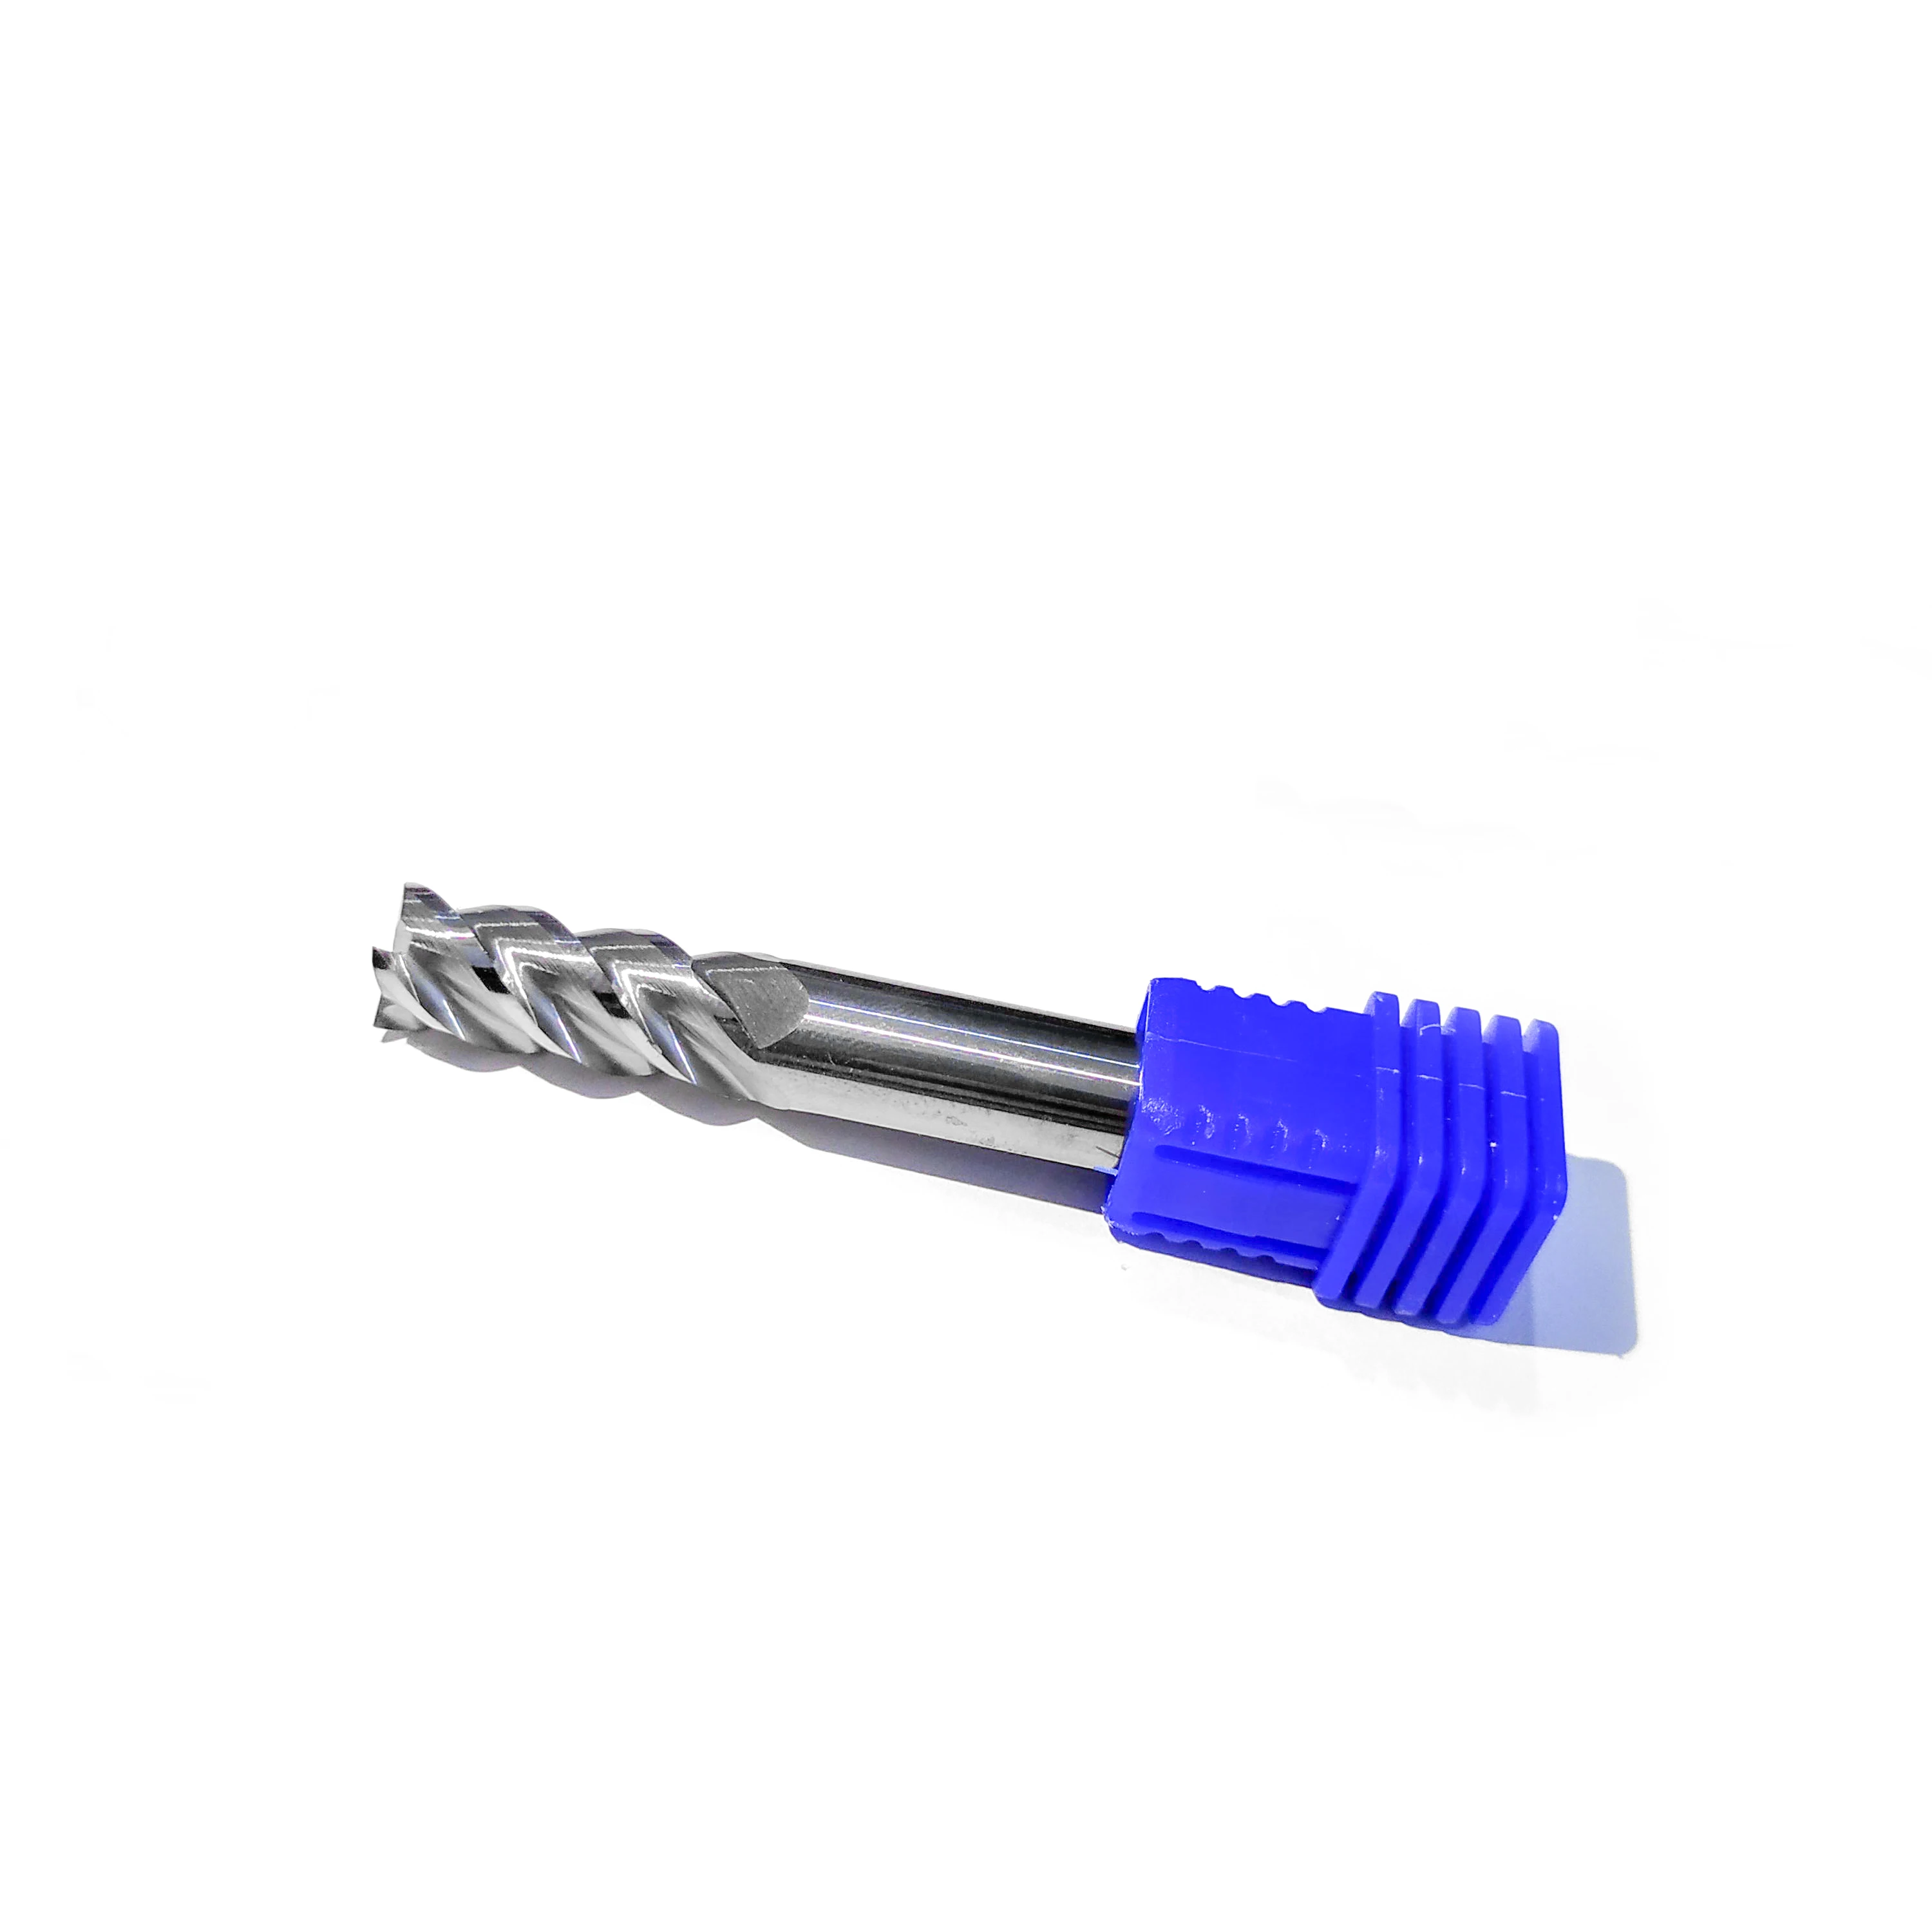 Tungsten Carbide End mill Roughing Cutting Tool